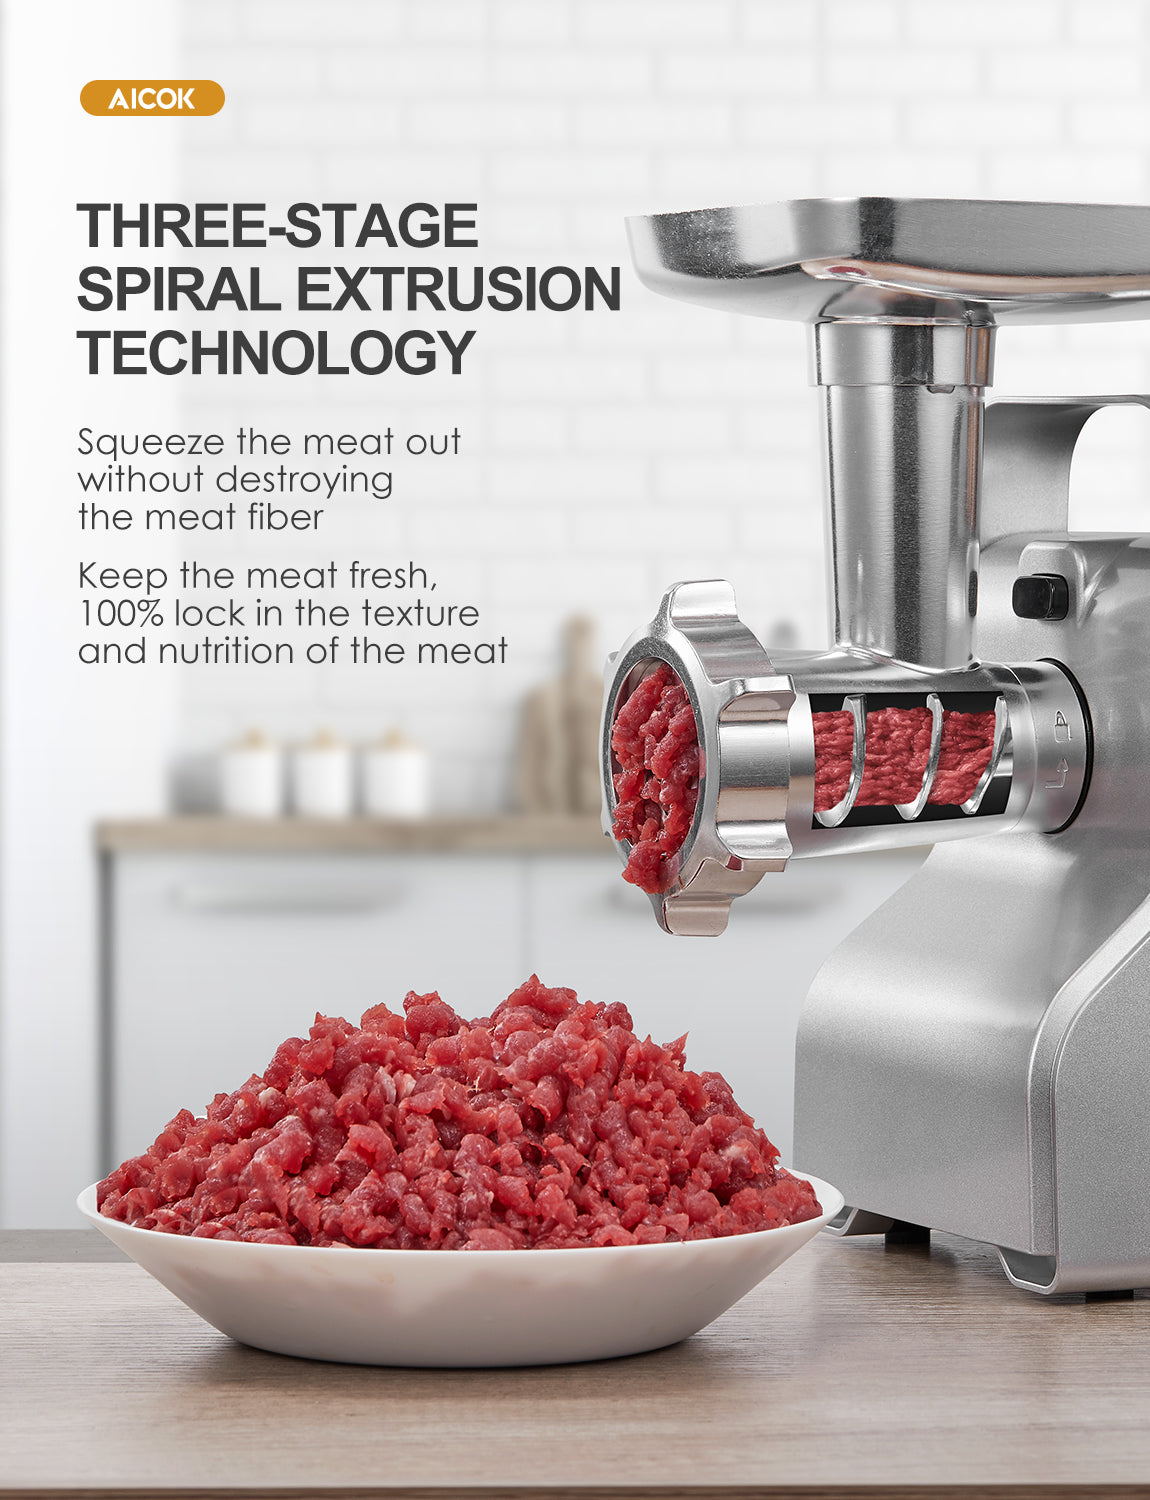 AICOK-5 IN 1 Meat Grinder, 2500W Max Powerful Meat Mincer MG2950R, food preparation, fresh meat, meat squeezer